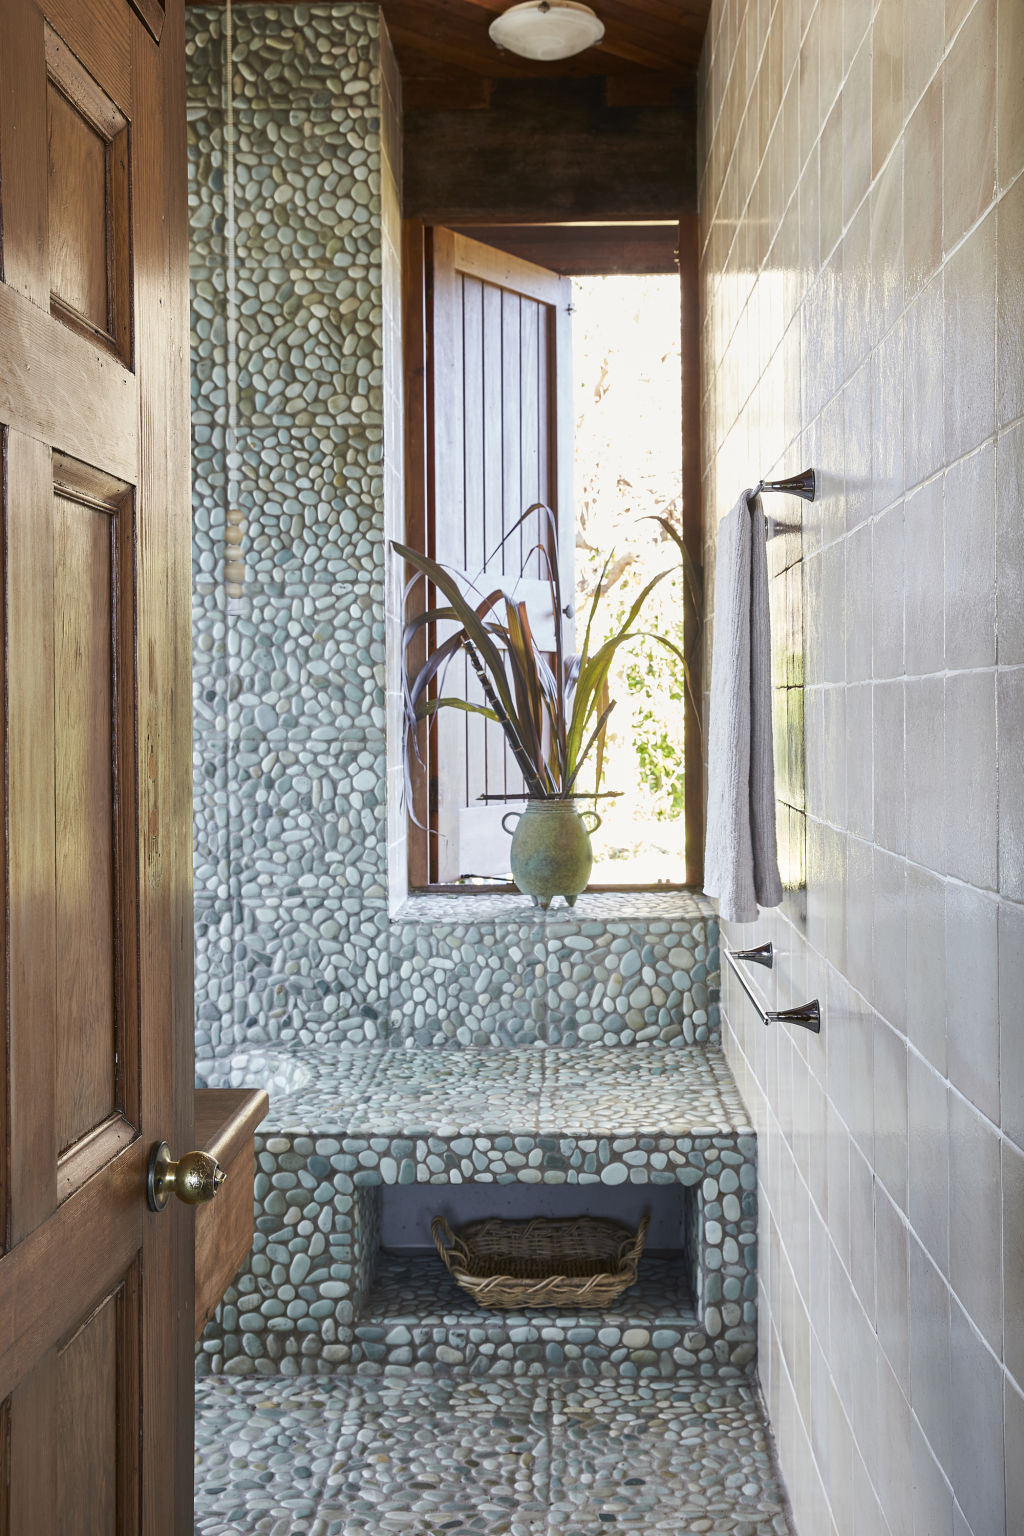 The main bathroom is finished with river pebbles and a sliding door that leads to the courtyard. Photo: Supplied